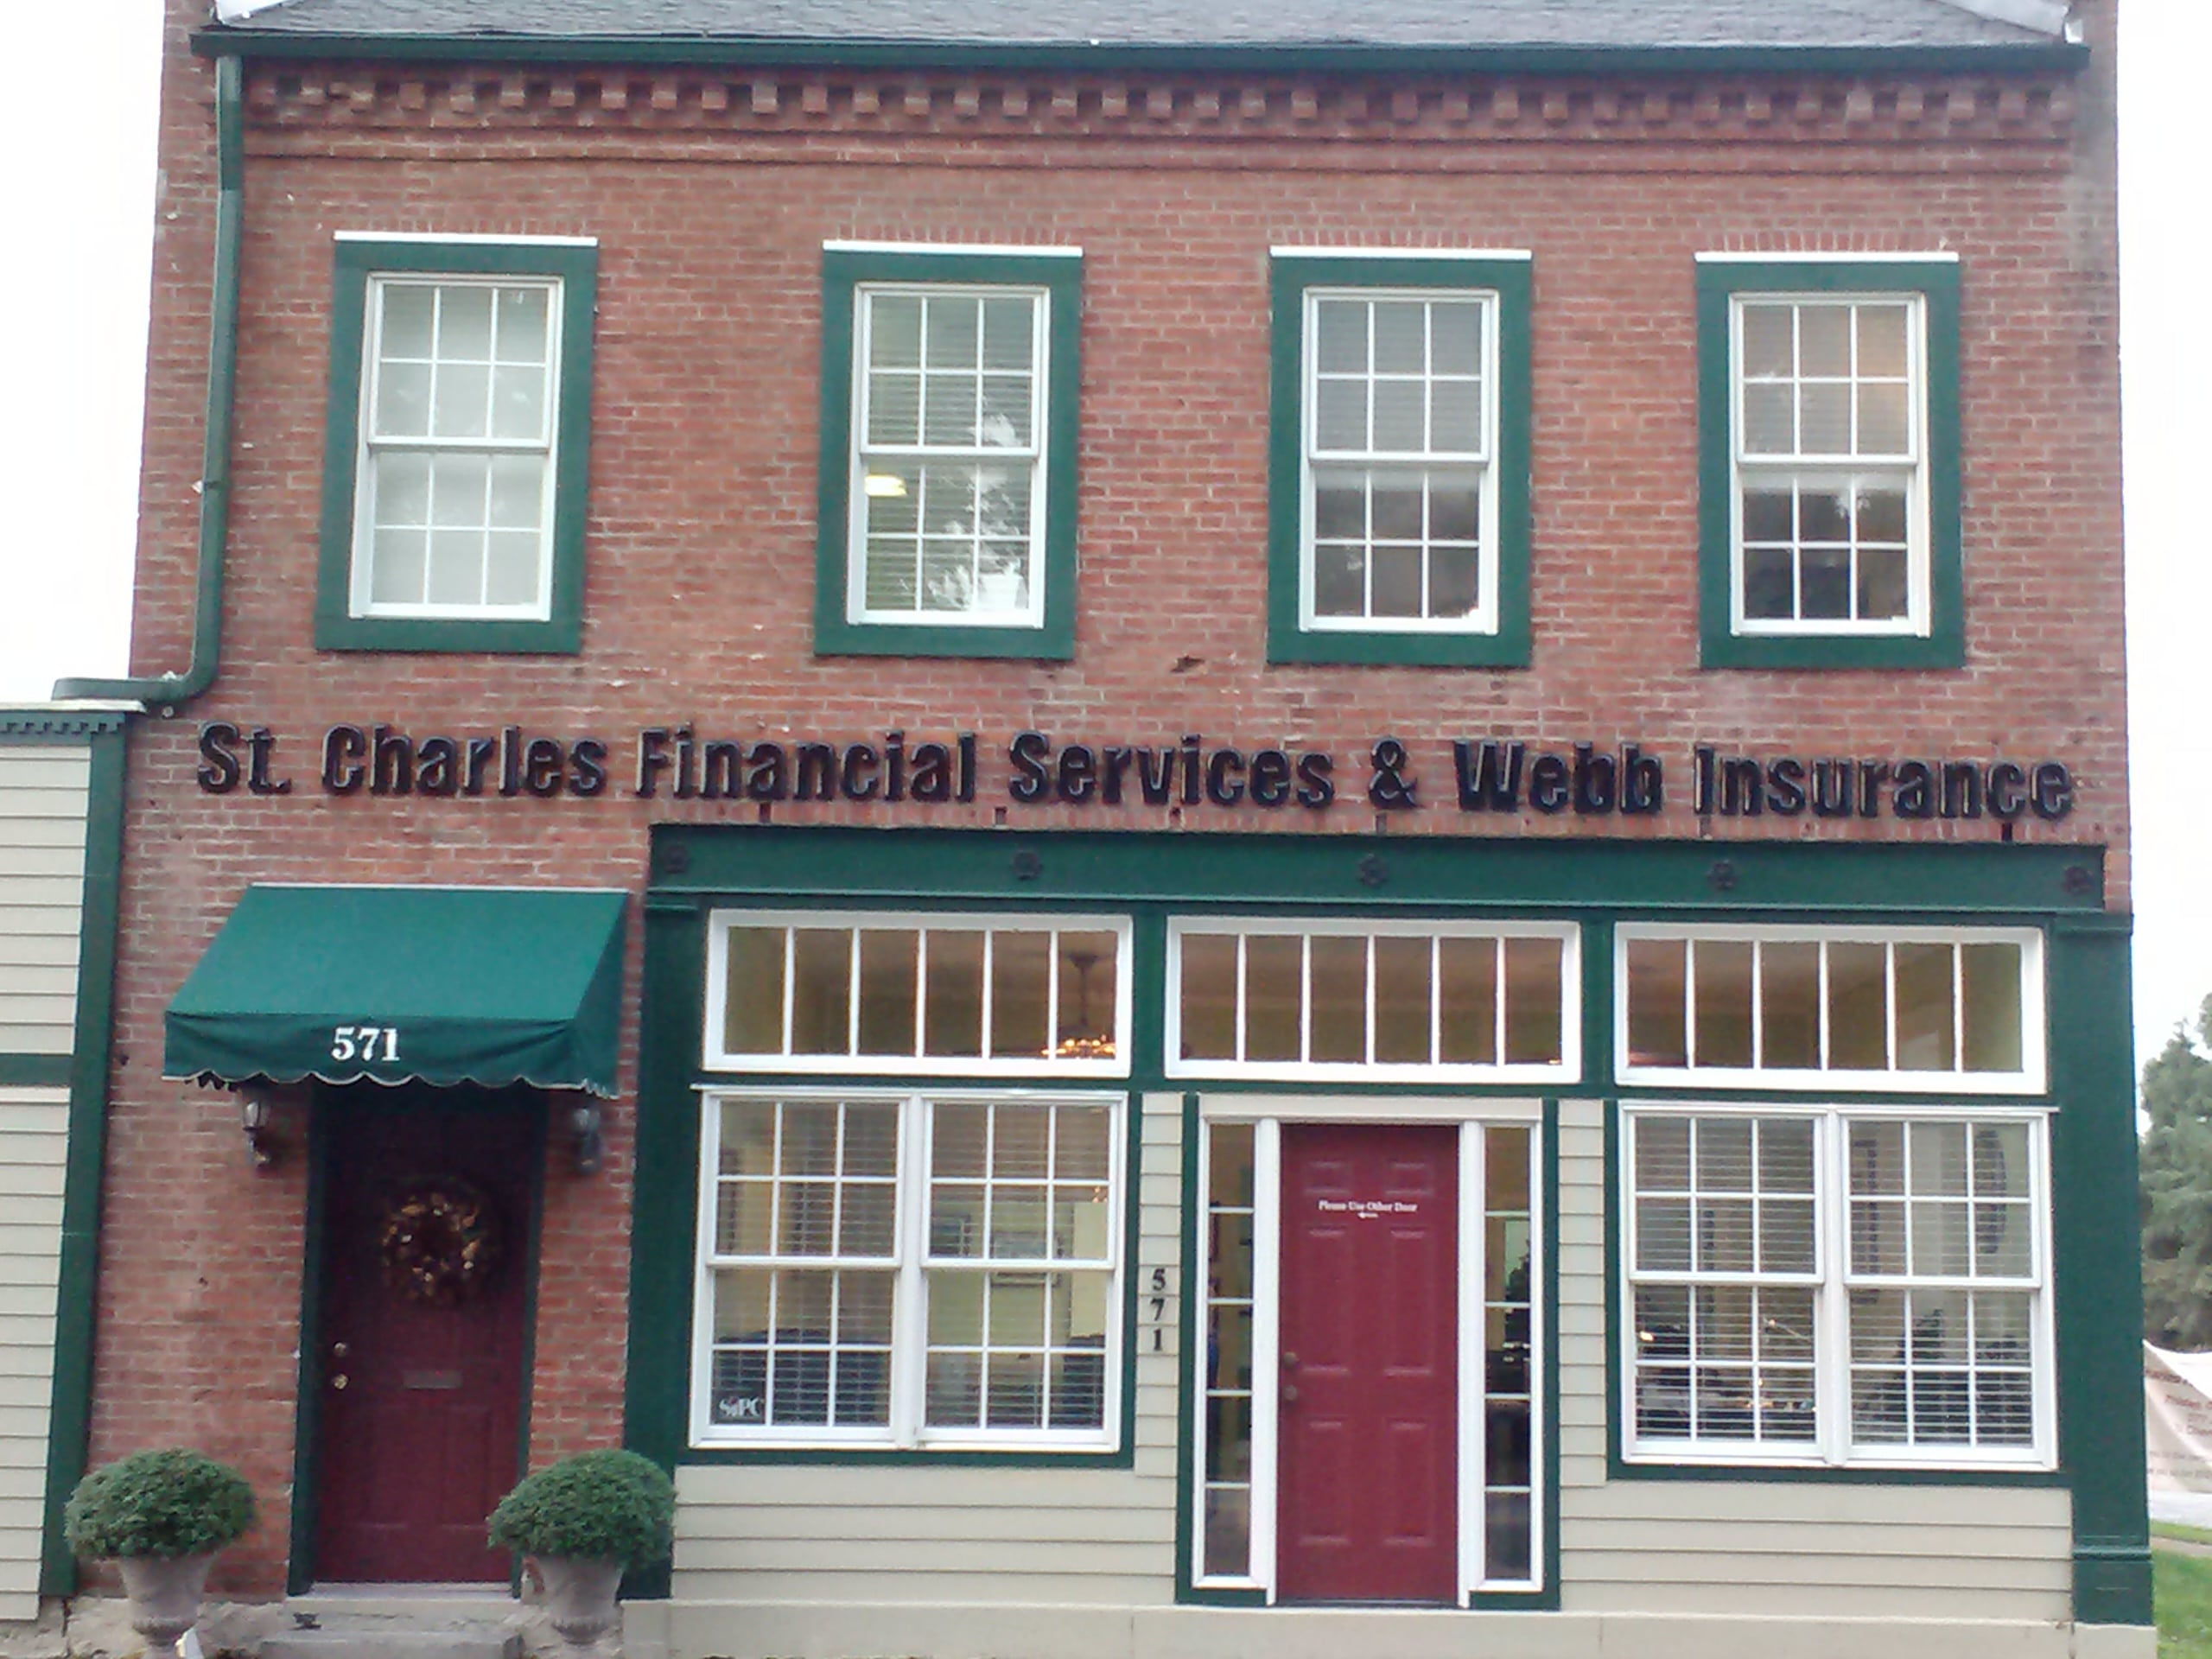 St. Charles Financial Services in St. Louis, Missouri